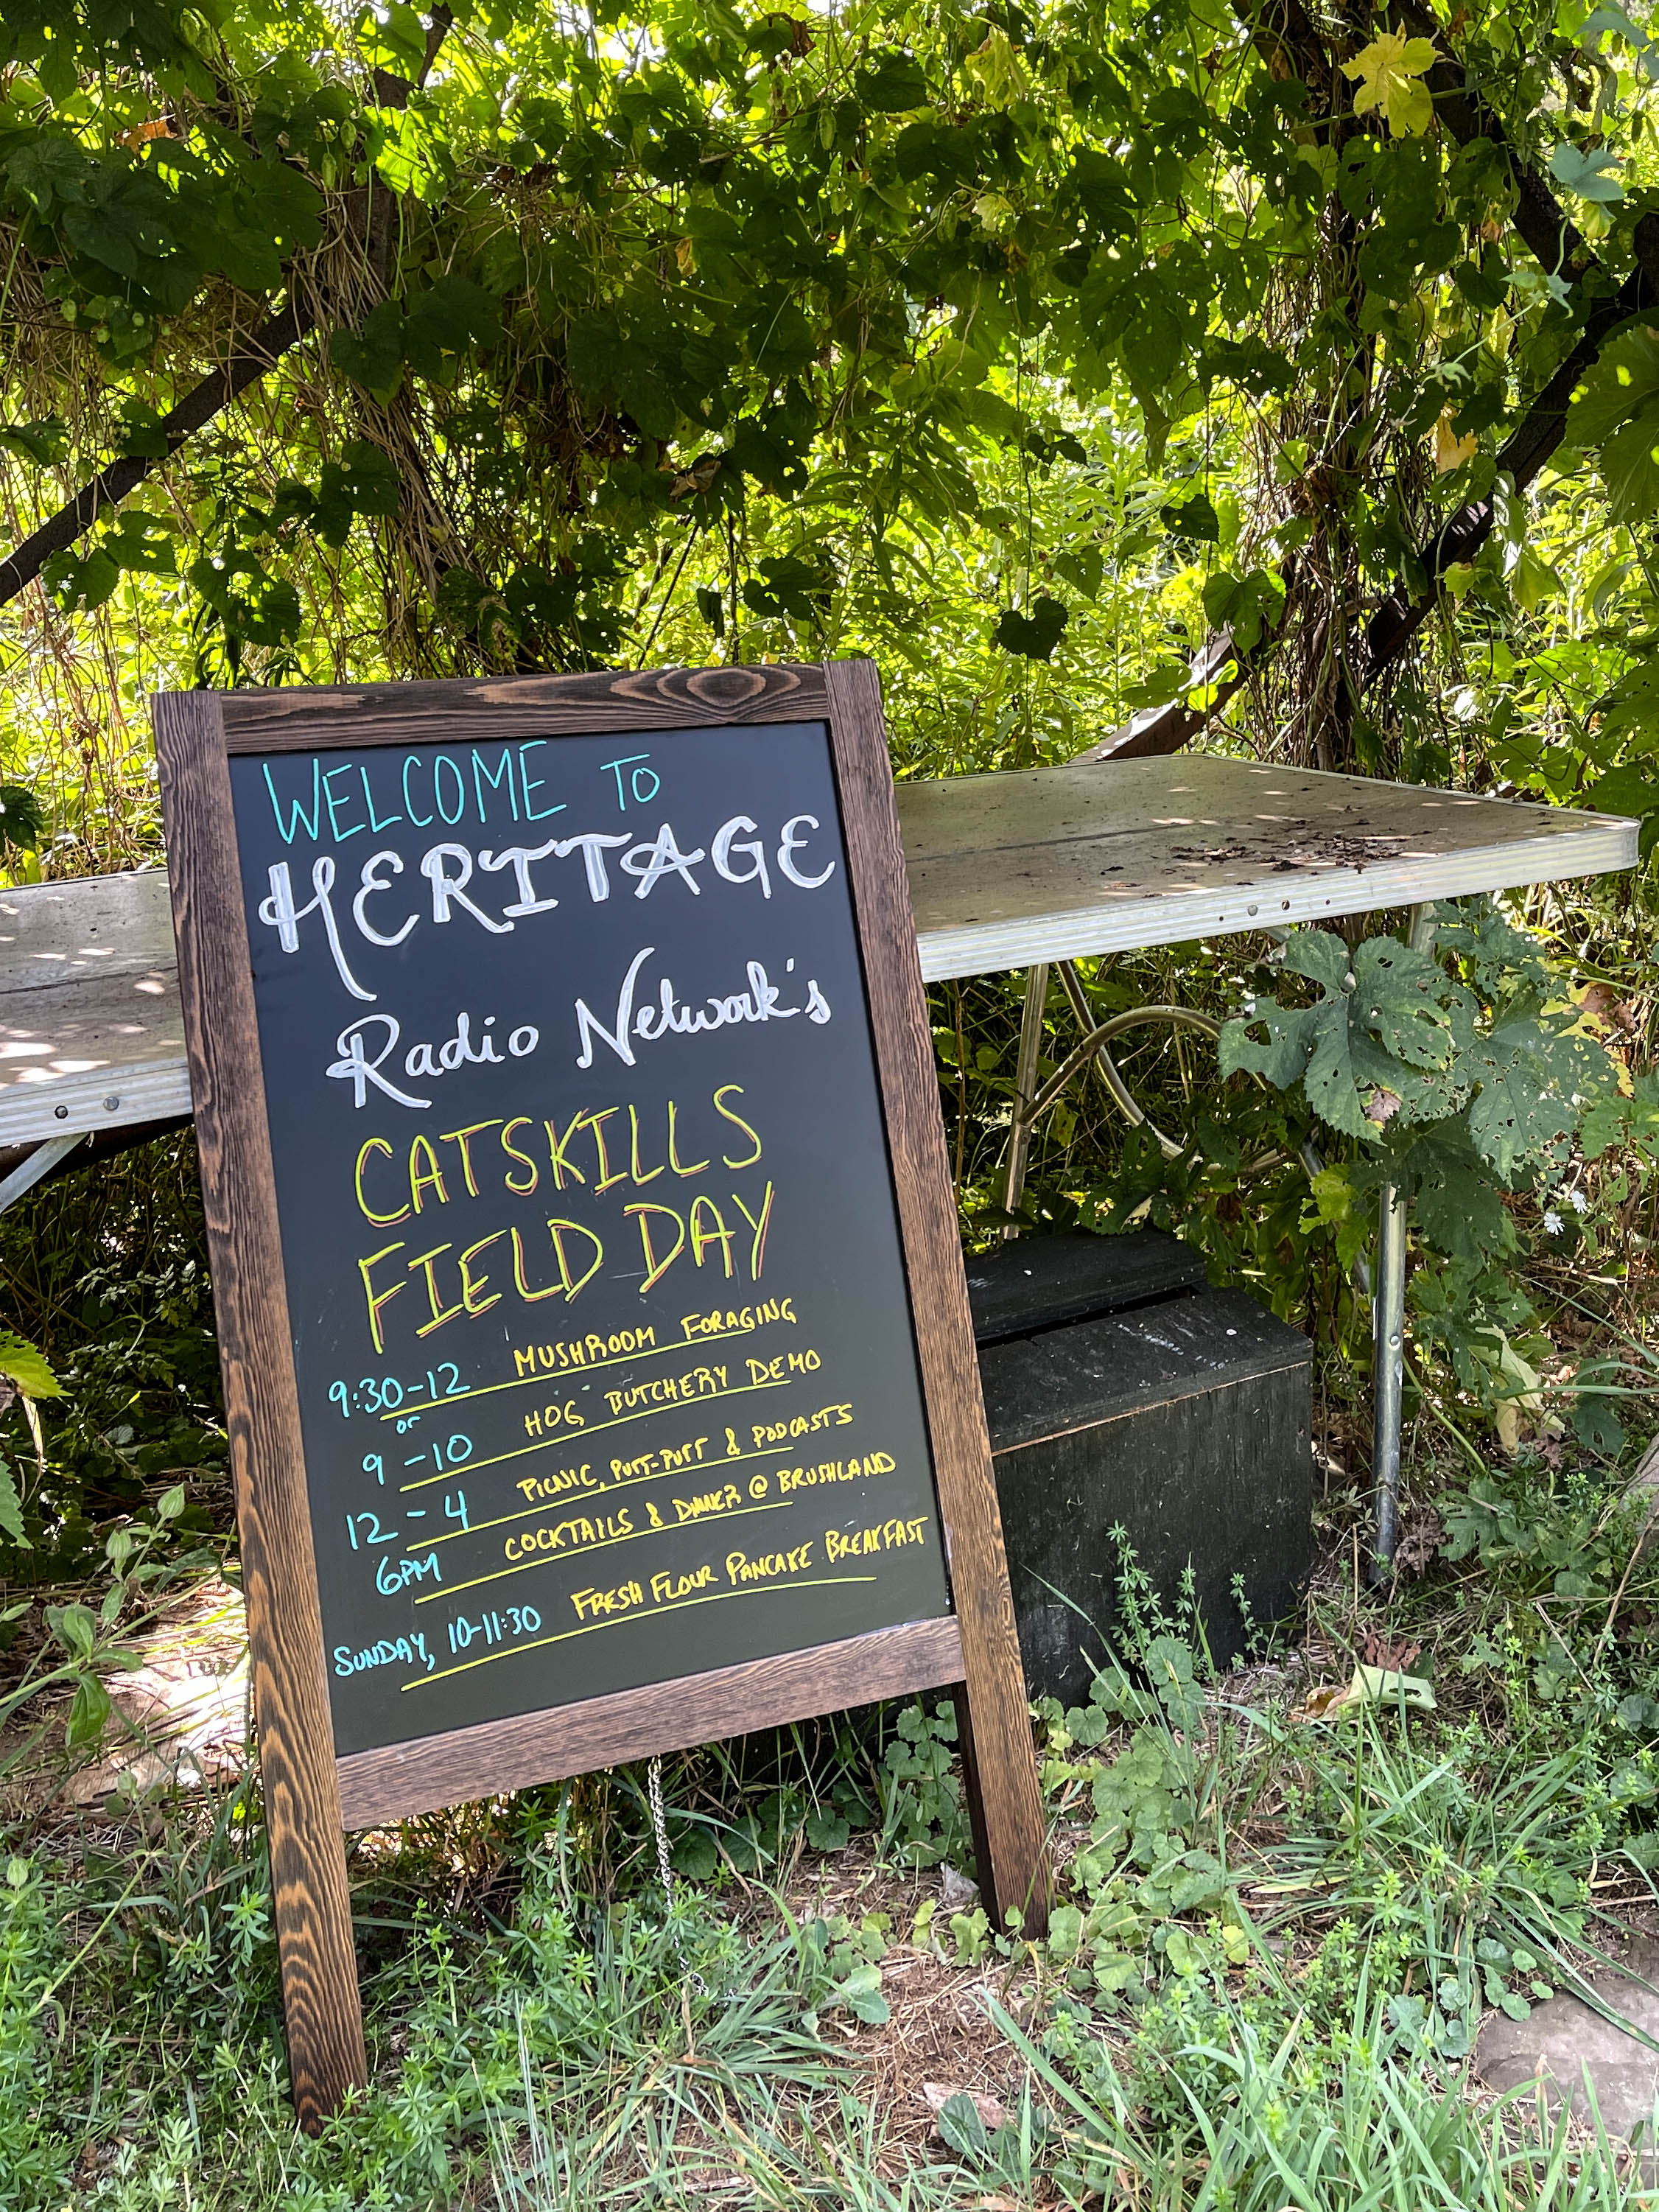 A board with the schedule for Heritage Radio Network's Catskills Field Day